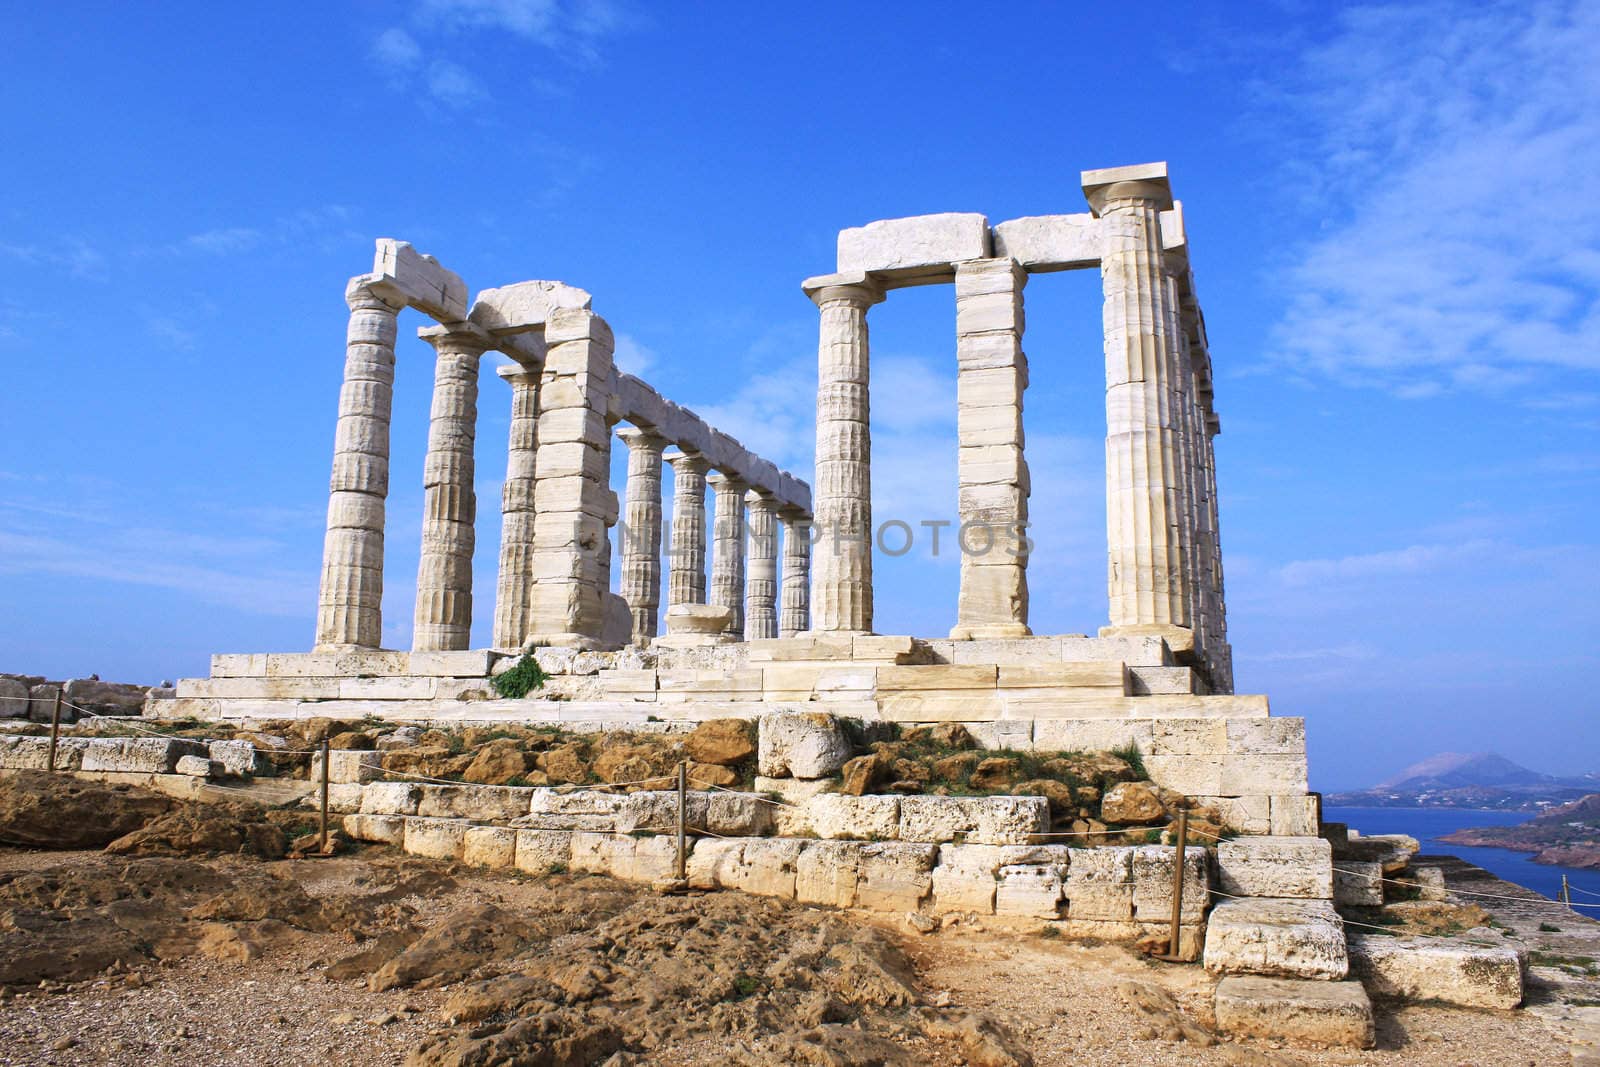 Remains of Temple of Poseidon, god of the sea in ancient Greek mythology, at Cape Sounion, near Athens (Greece).